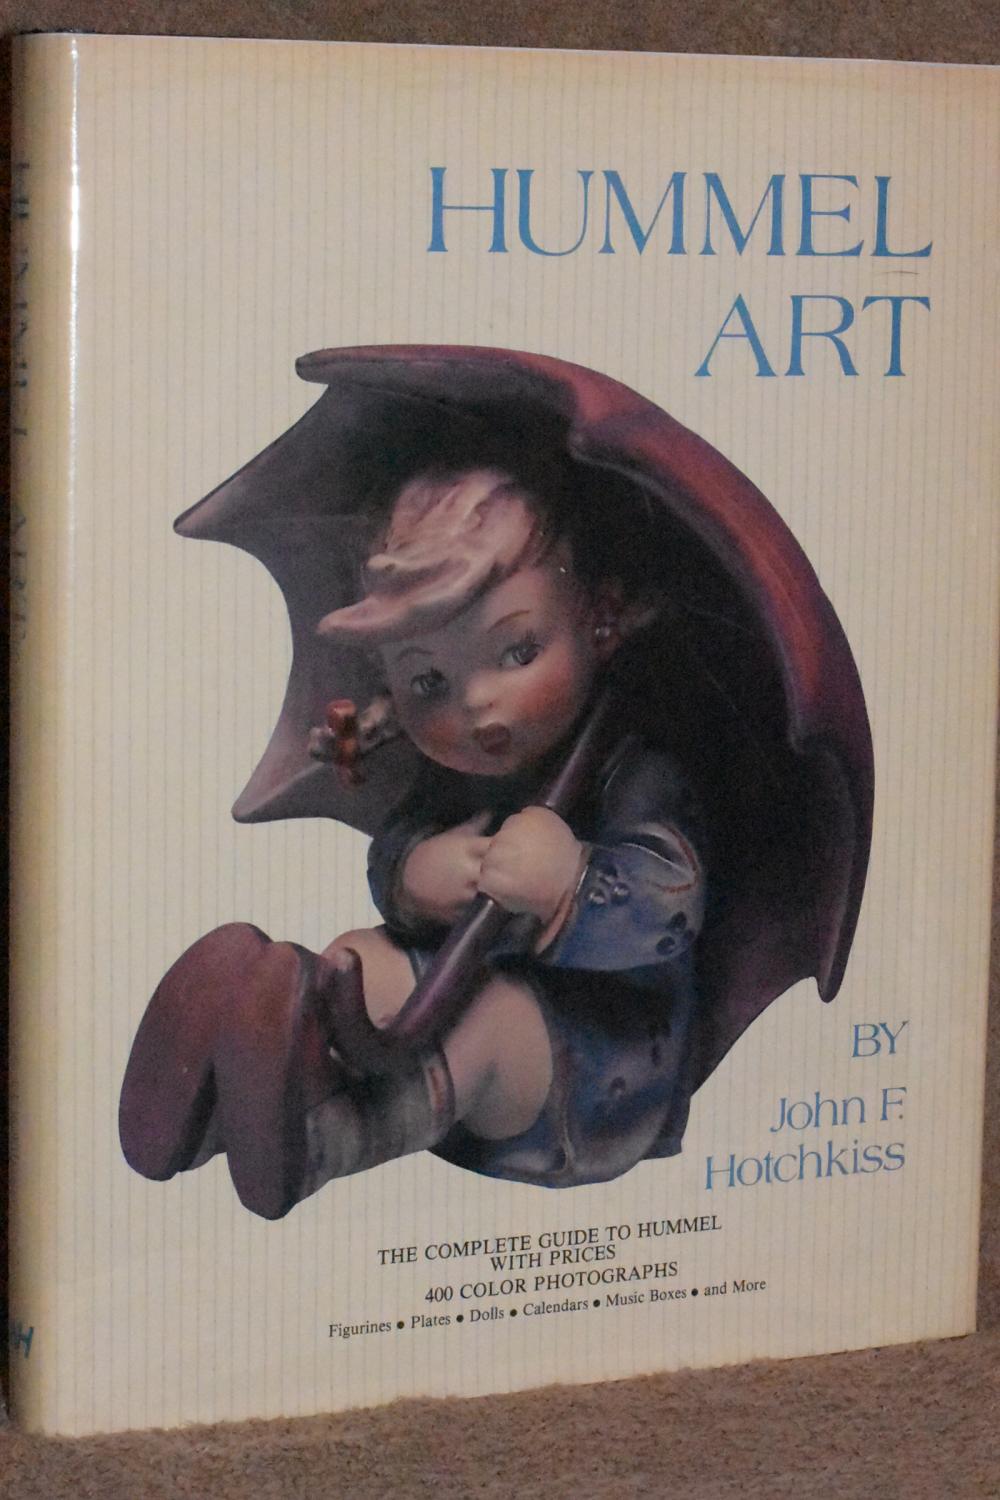 Hummel Art; The Complete Guide to Hummel With Prices by John F. Hotchkiss: Near Fine Hardcover (1978) 1st | Books by White/Walnut Books